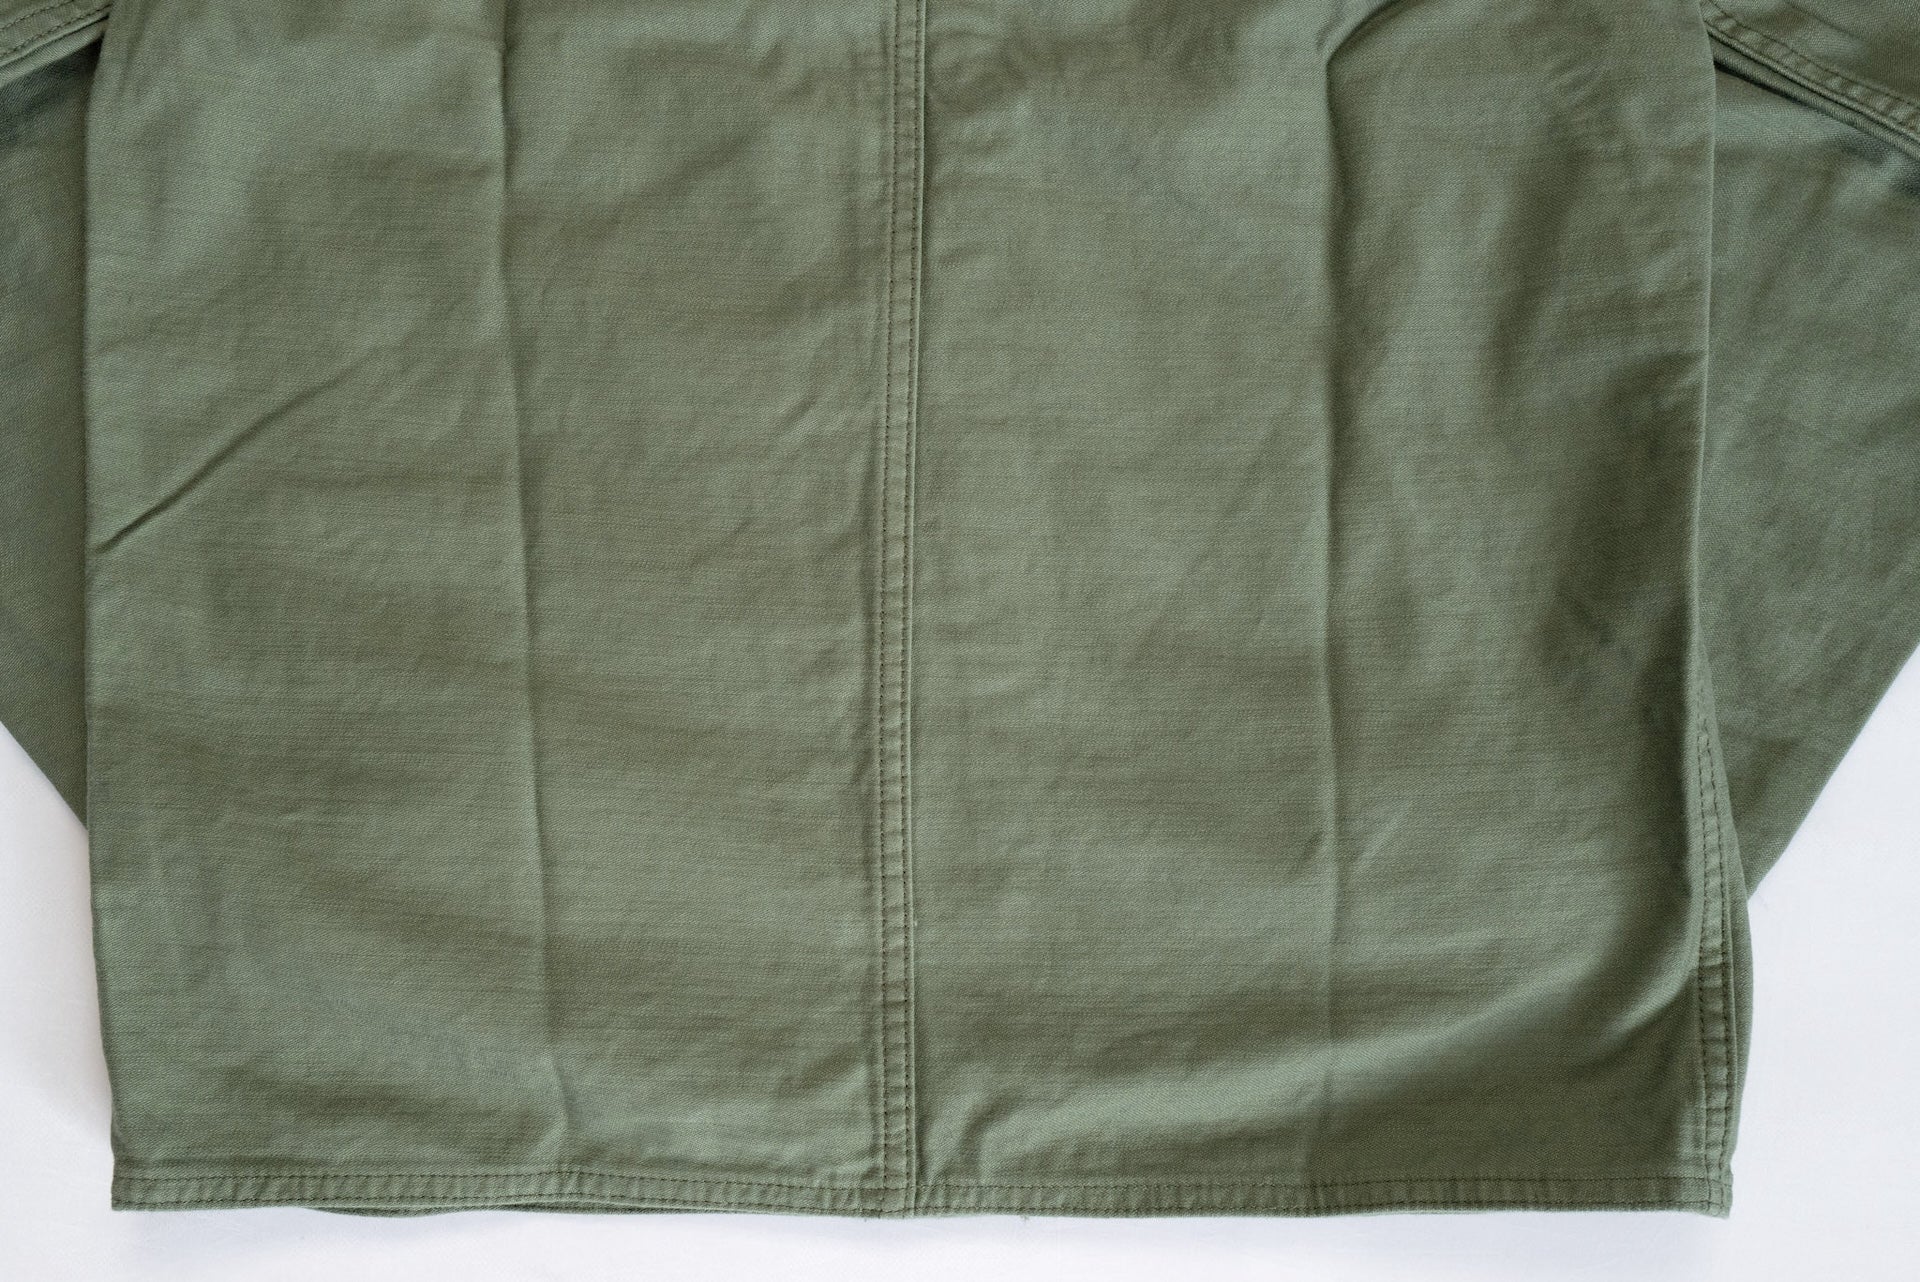 Japan Blue 12oz Back Satin Military Coverall (Olive)